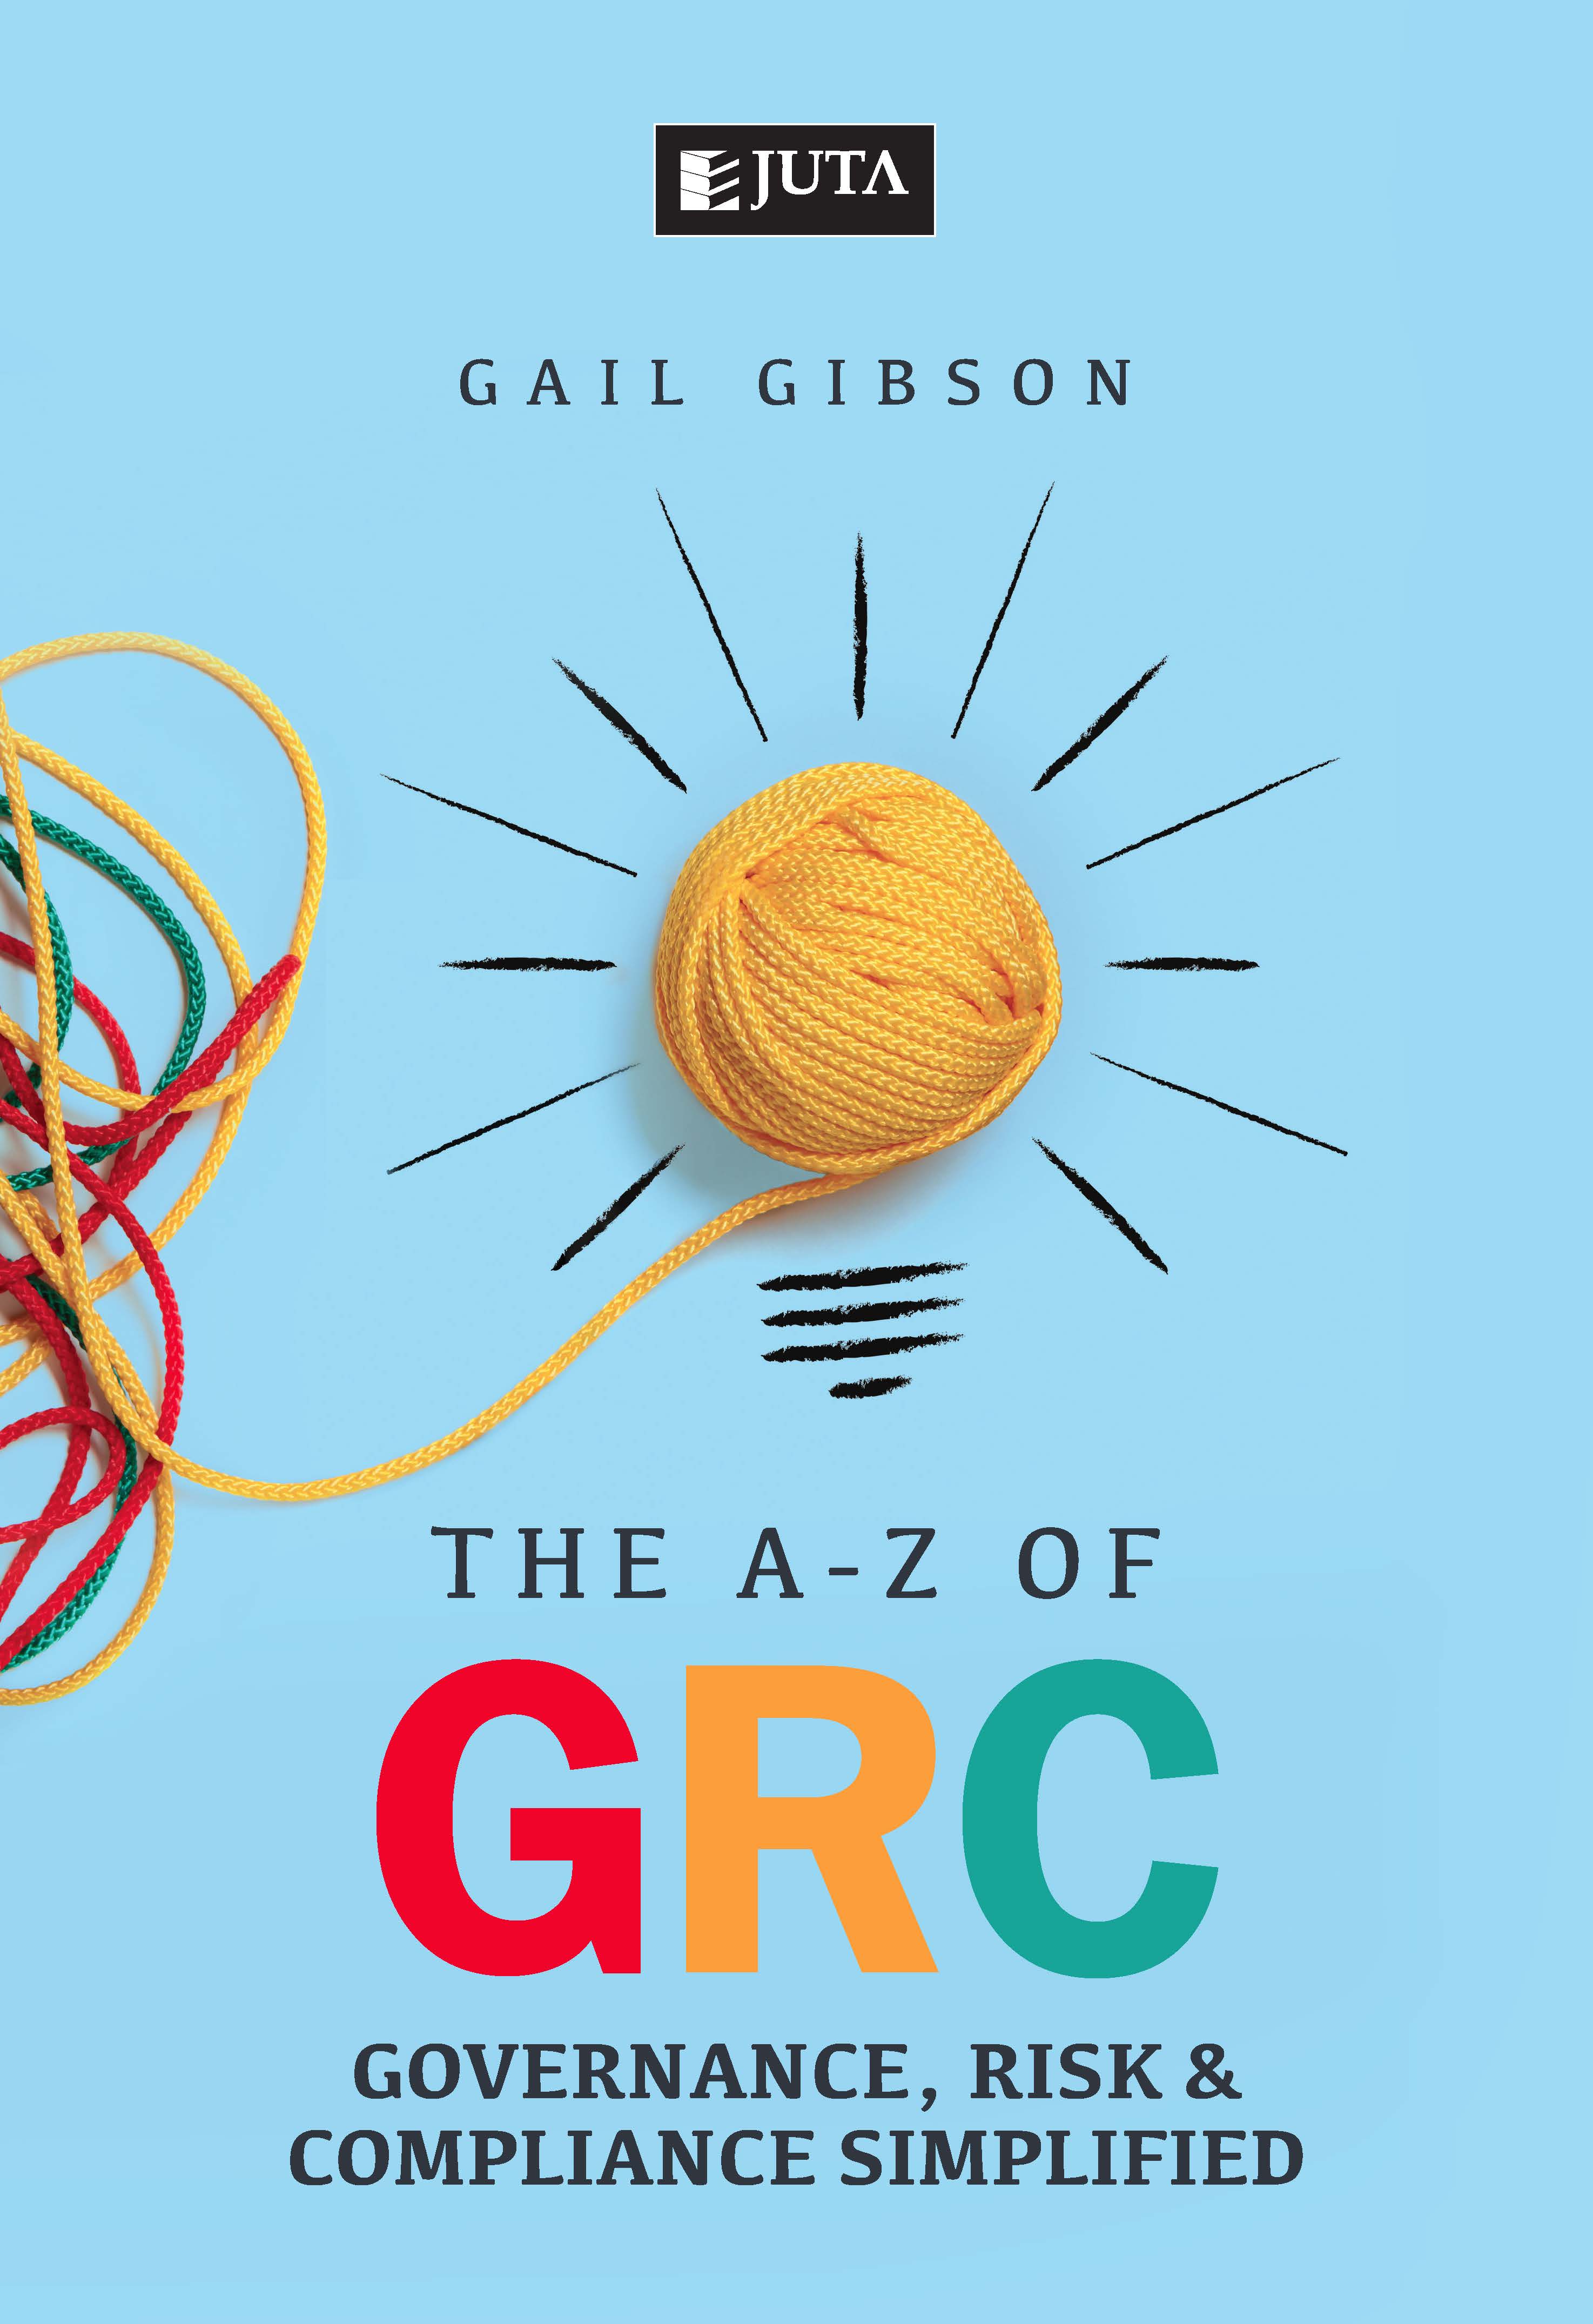 A-Z of GRC, The